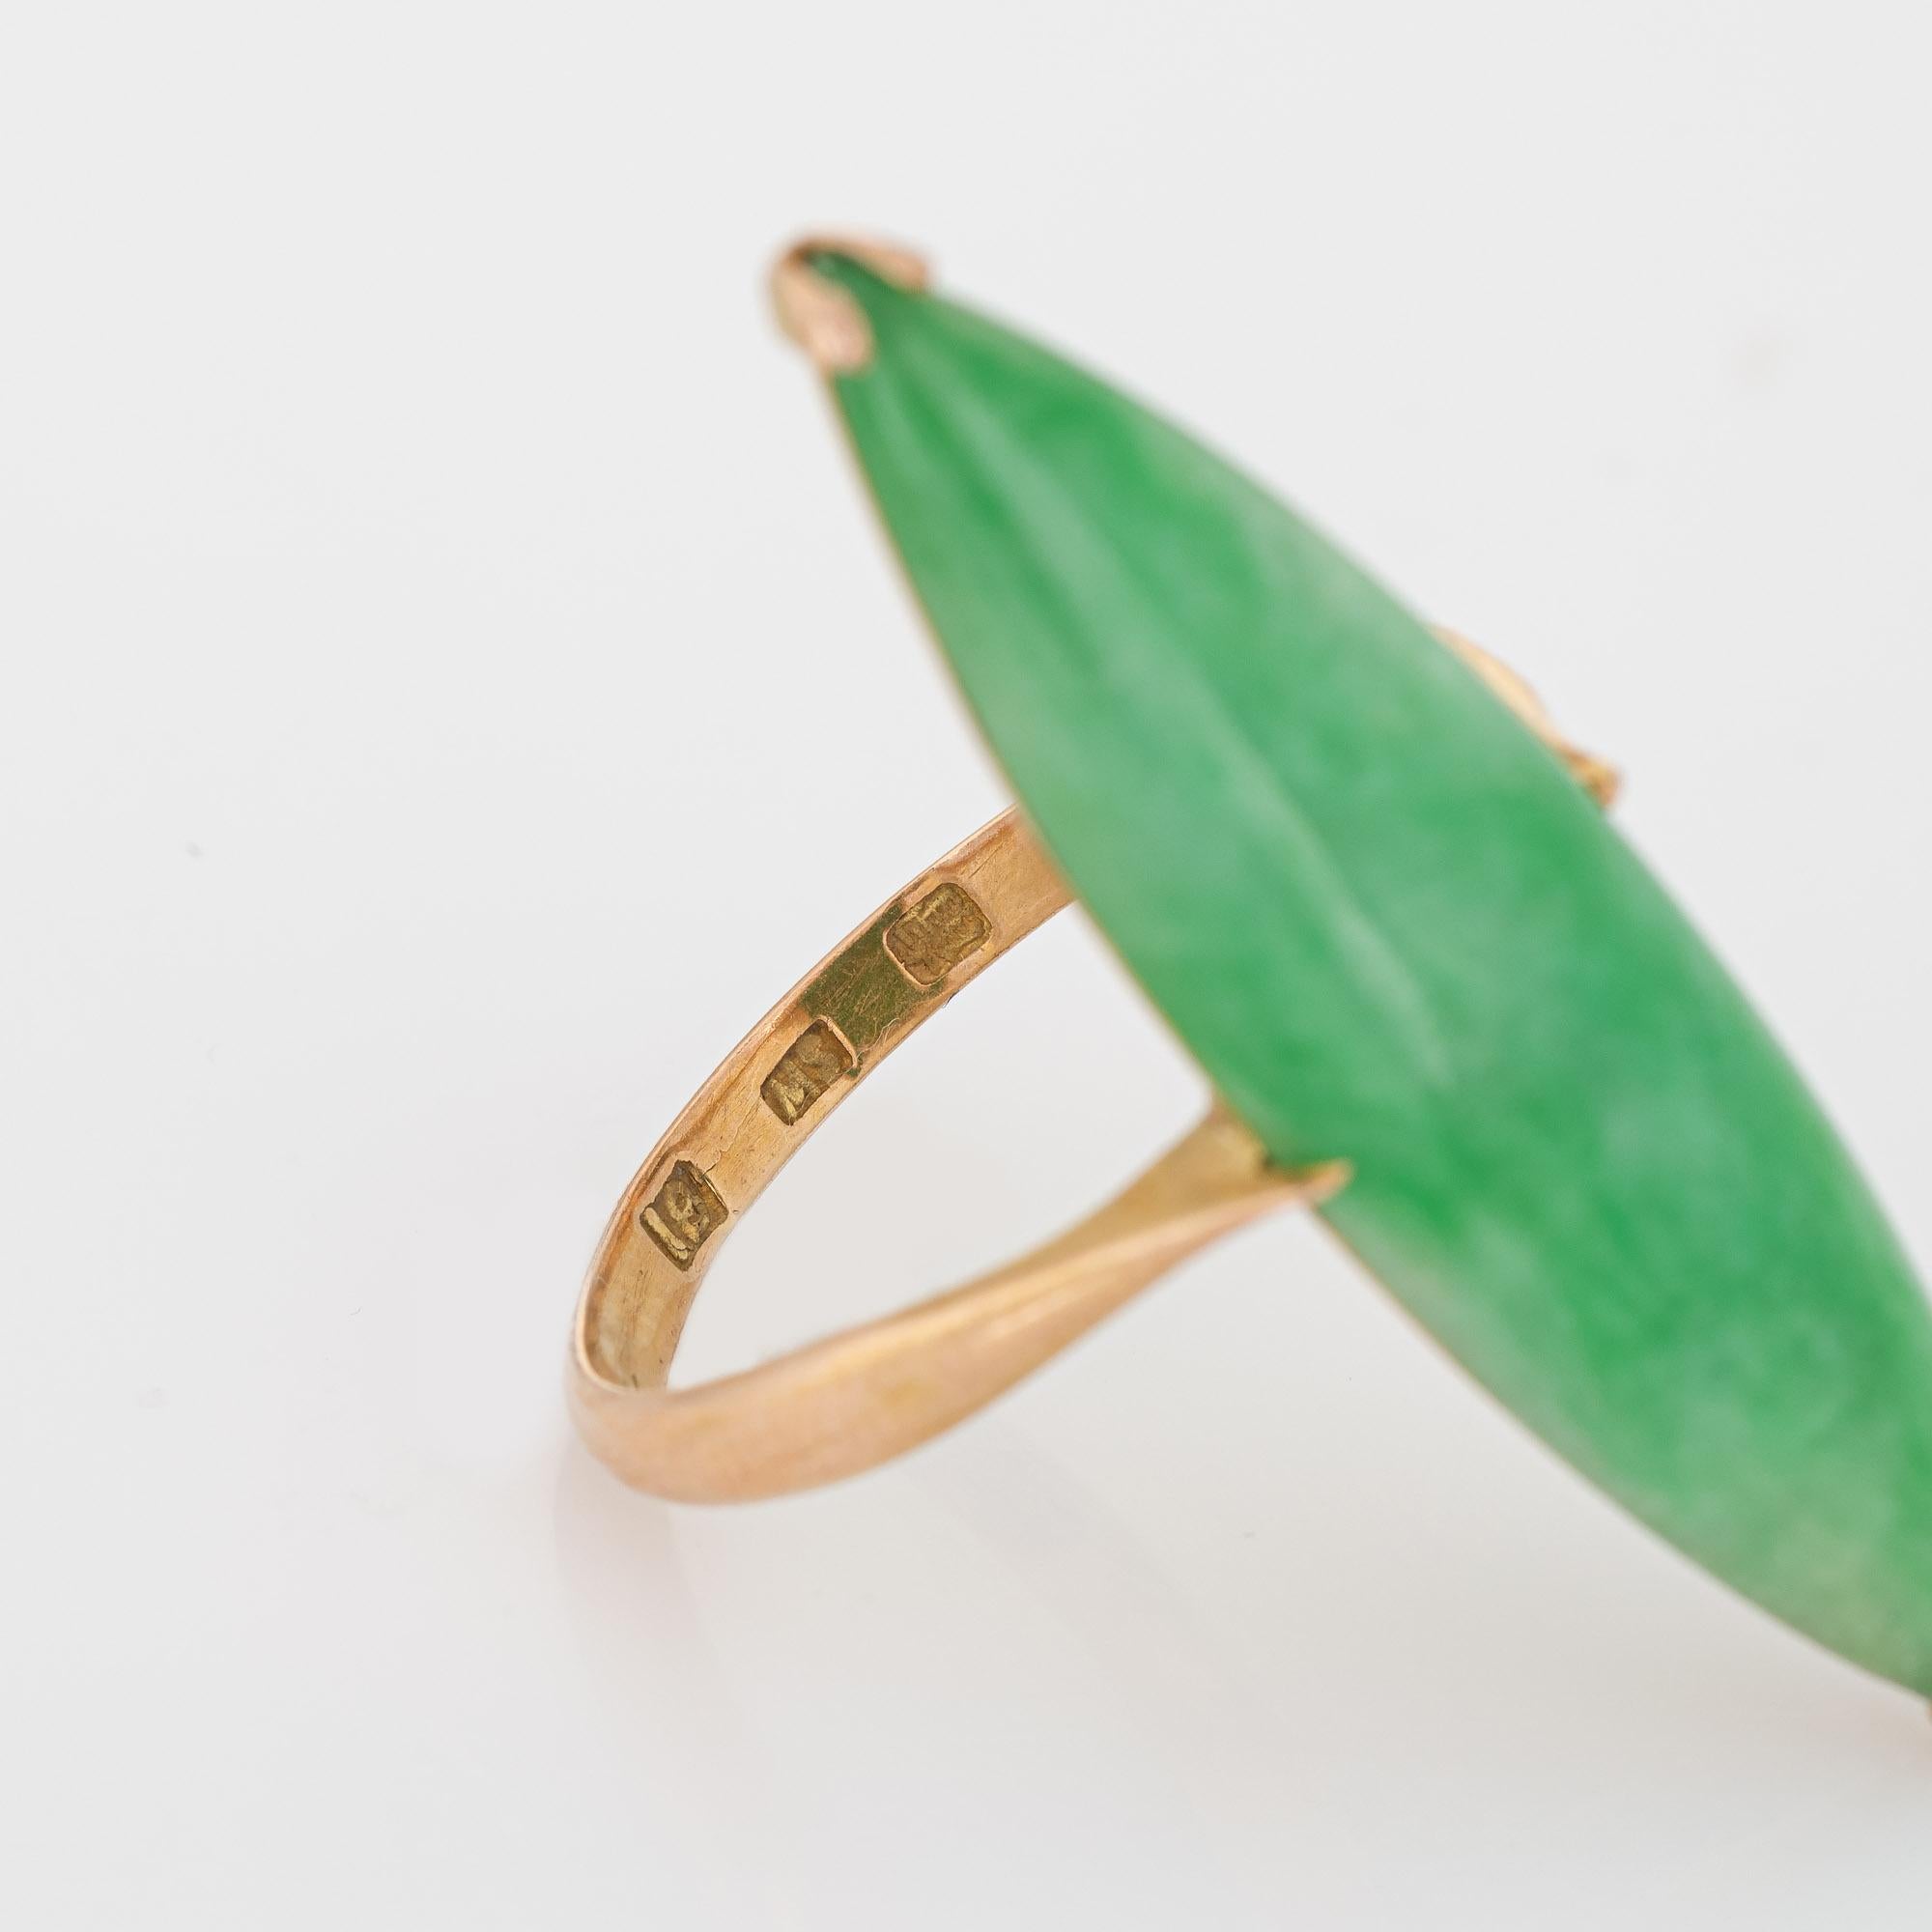 Long Jade Ring Vintage 18k Yellow Gold Sz 9 Elongated Cocktail Fine Jewelry  1